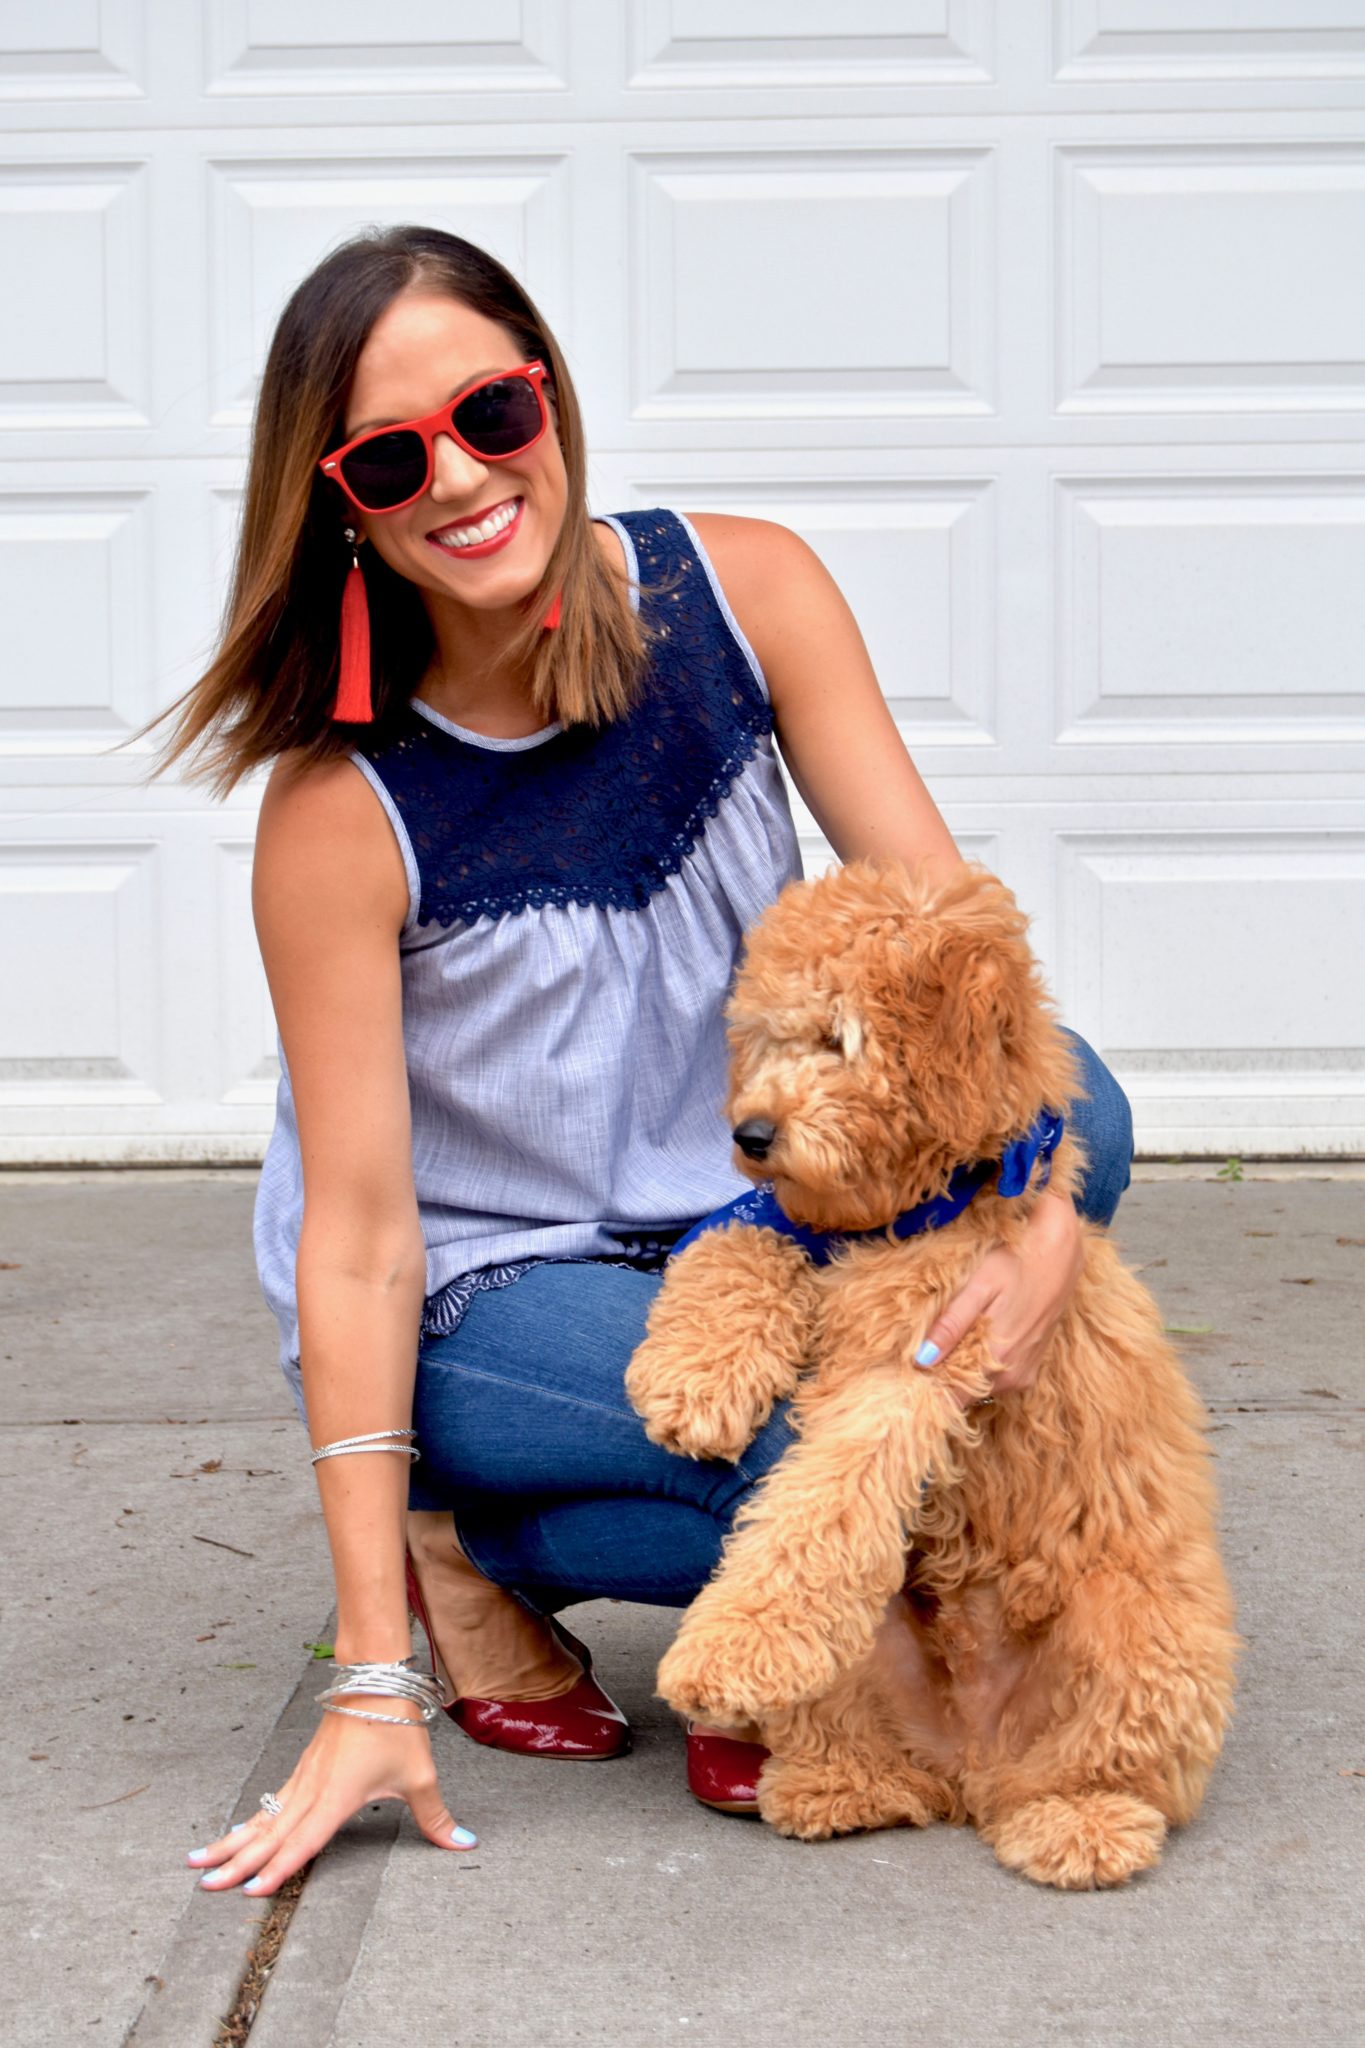 happy fourth of july! rounding up two fun pregnancy looks for the fourth // cait's plate